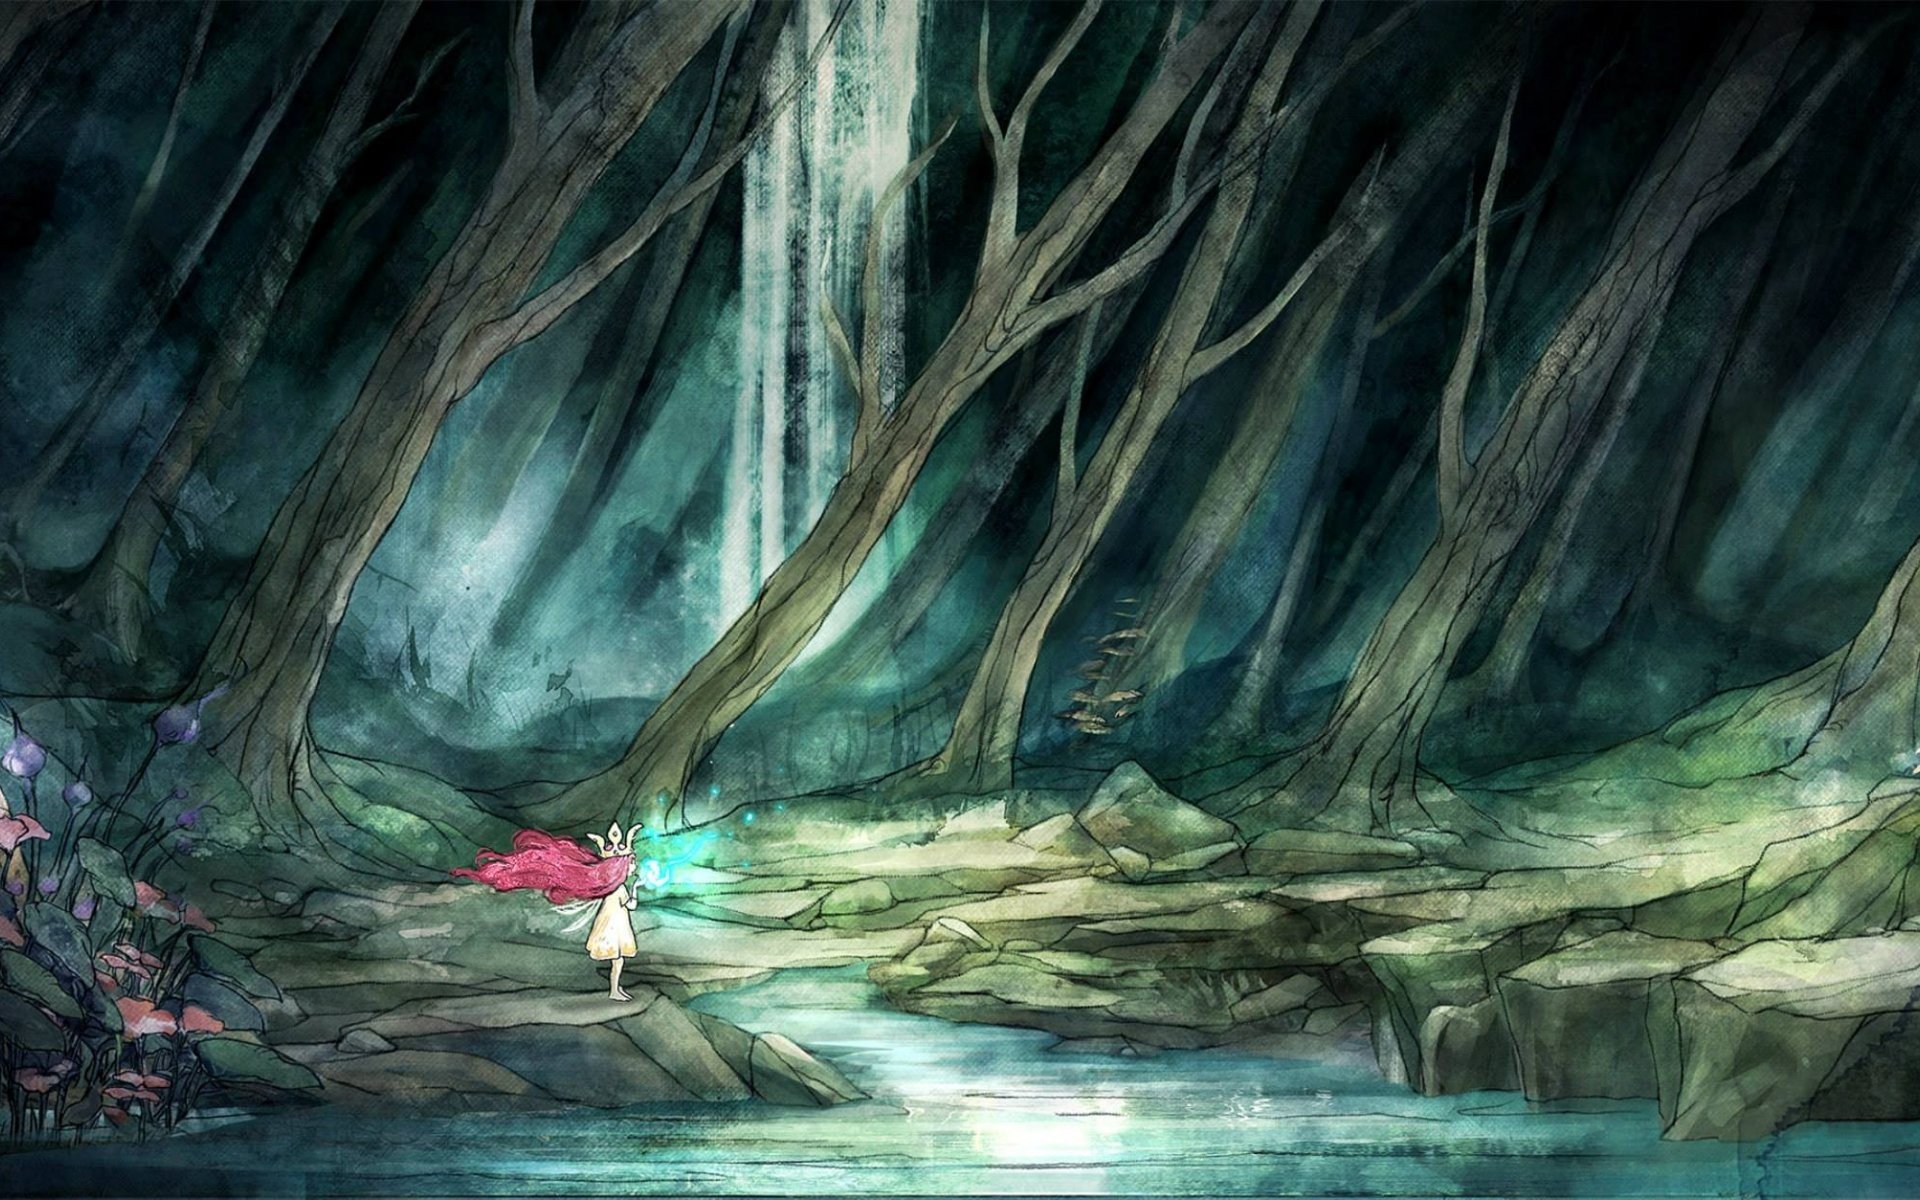 Child Of Light 1920X1080 Wallpapers